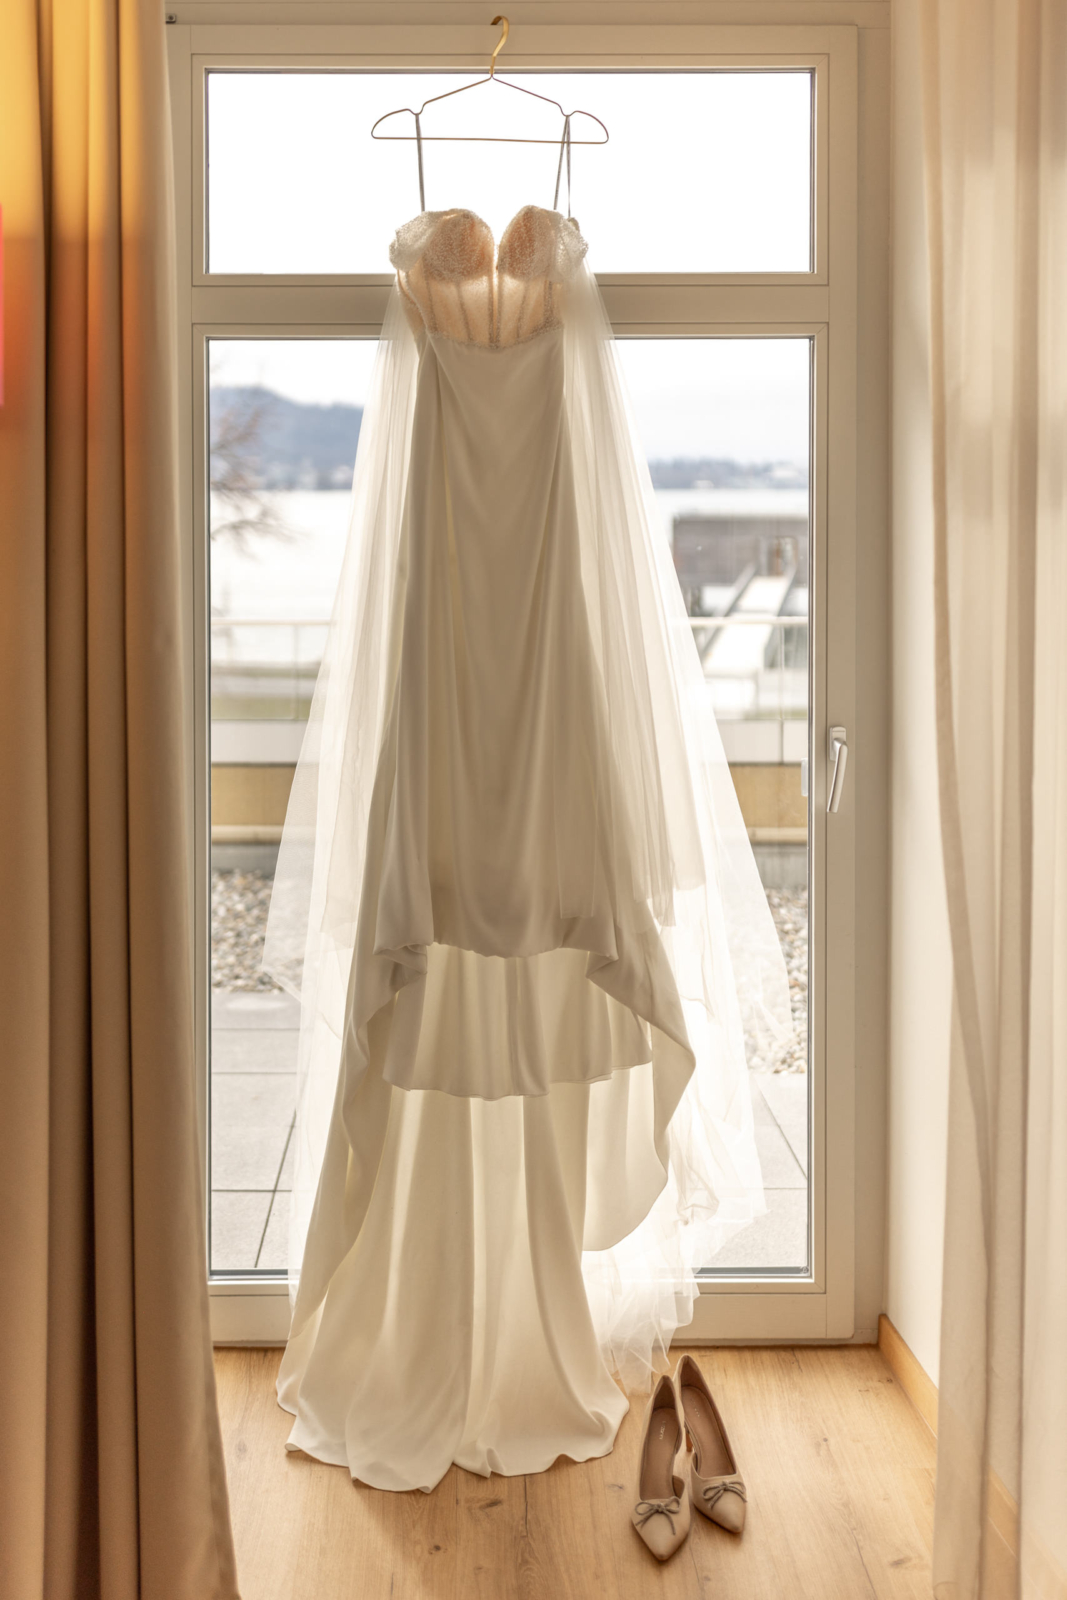 wedding dress from Brautmoment by Anna-Lena